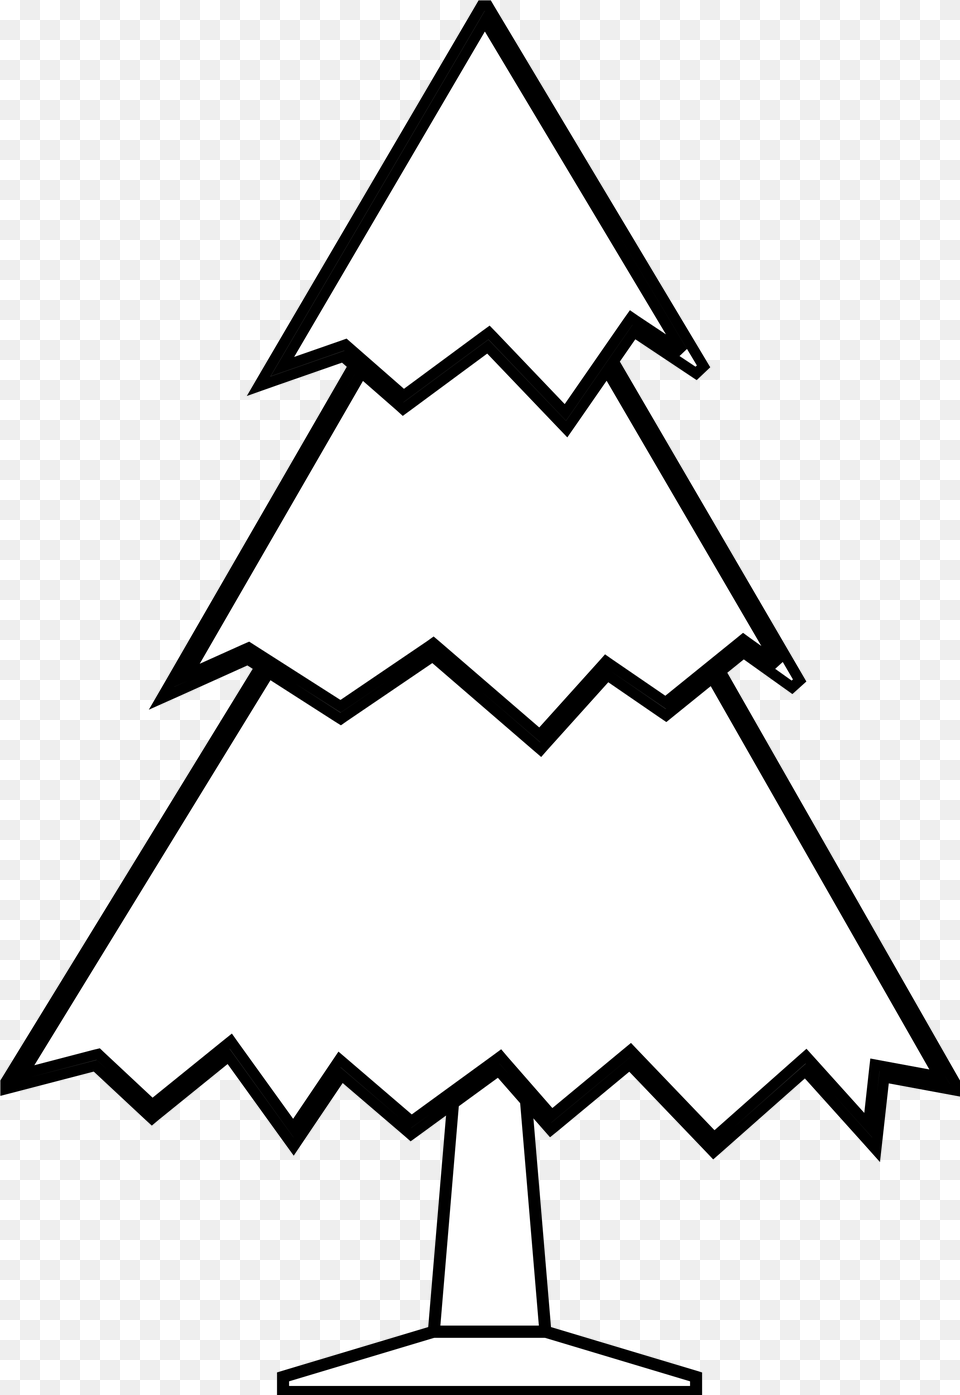 Tree Line Art Clip Easy Christmas Drawing Ideas, Stencil, Triangle Png Image